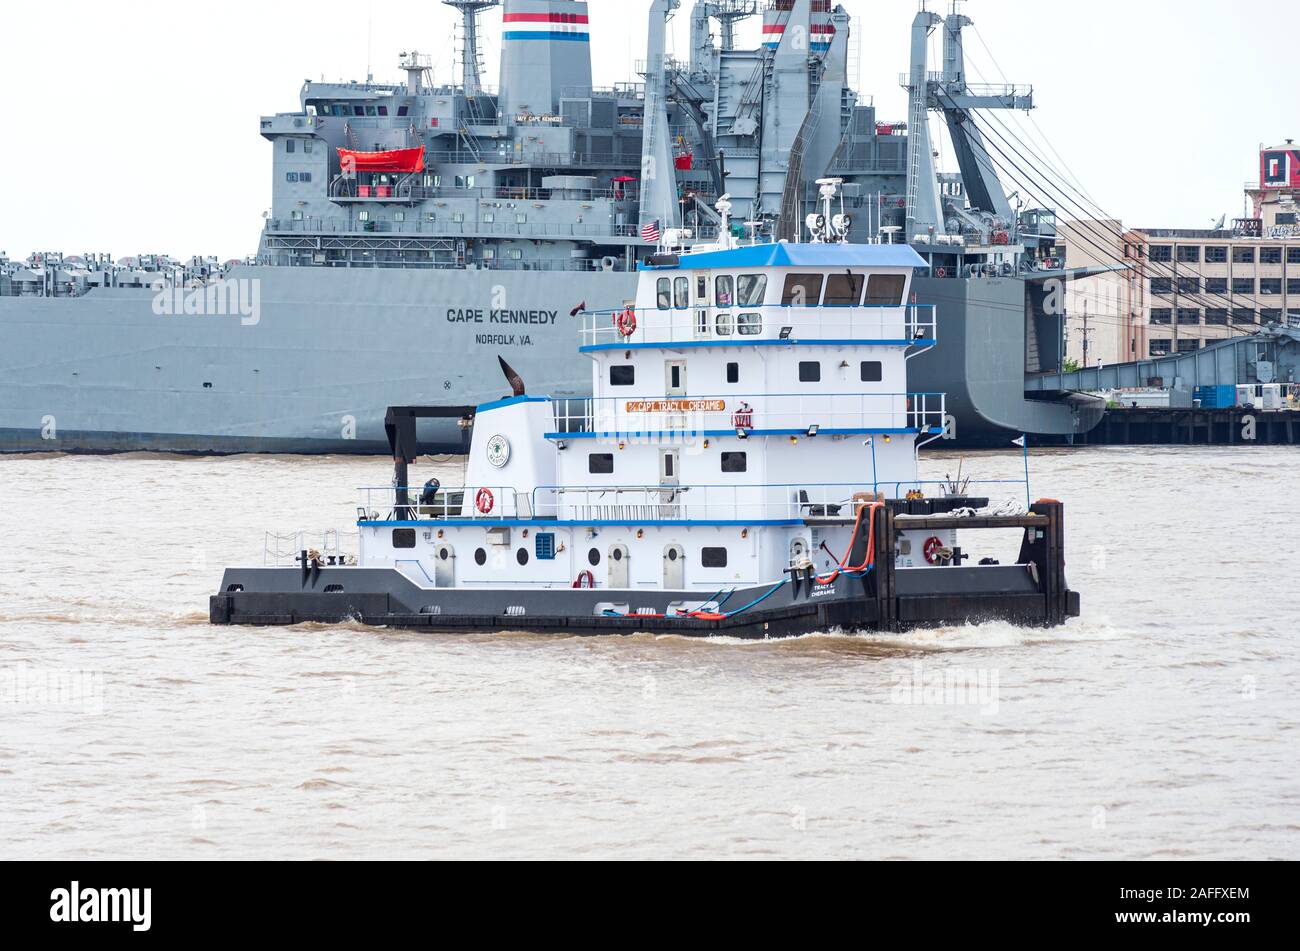 New Orleans, LA/USA – June 14, 2019: Roll on/ roll off cargo carrier operated by United States Navy’s Sealift Command and towboat on Mississippi River Stock Photo